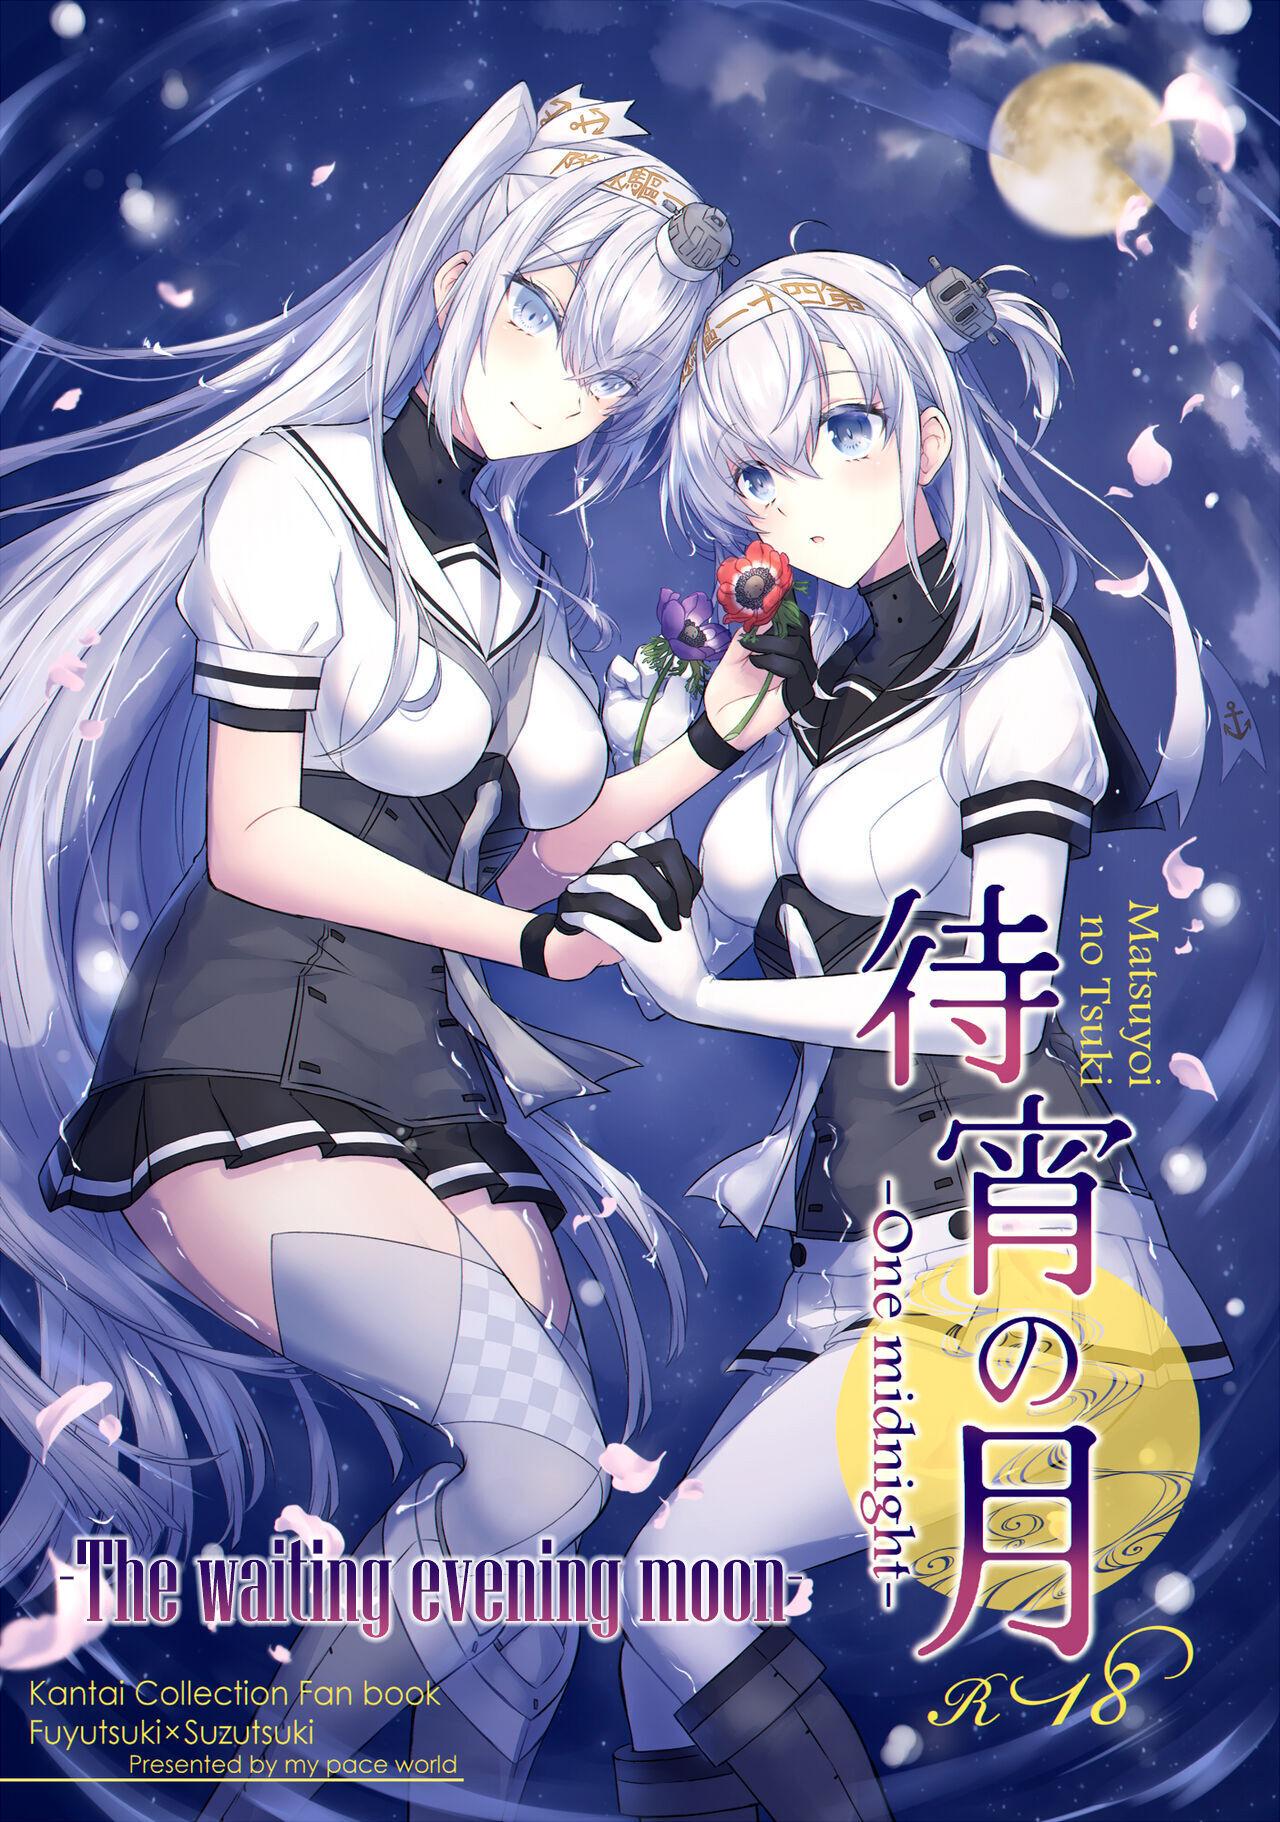 Mistress [my pace world (Kabocha Torte)] Matsuyoi no tsuki -One Midnight- | The waiting evening moon -One Midnight- (Kantai Collection -KanColle-) [English] [Digital] - Kantai collection Solo Girl - Picture 1